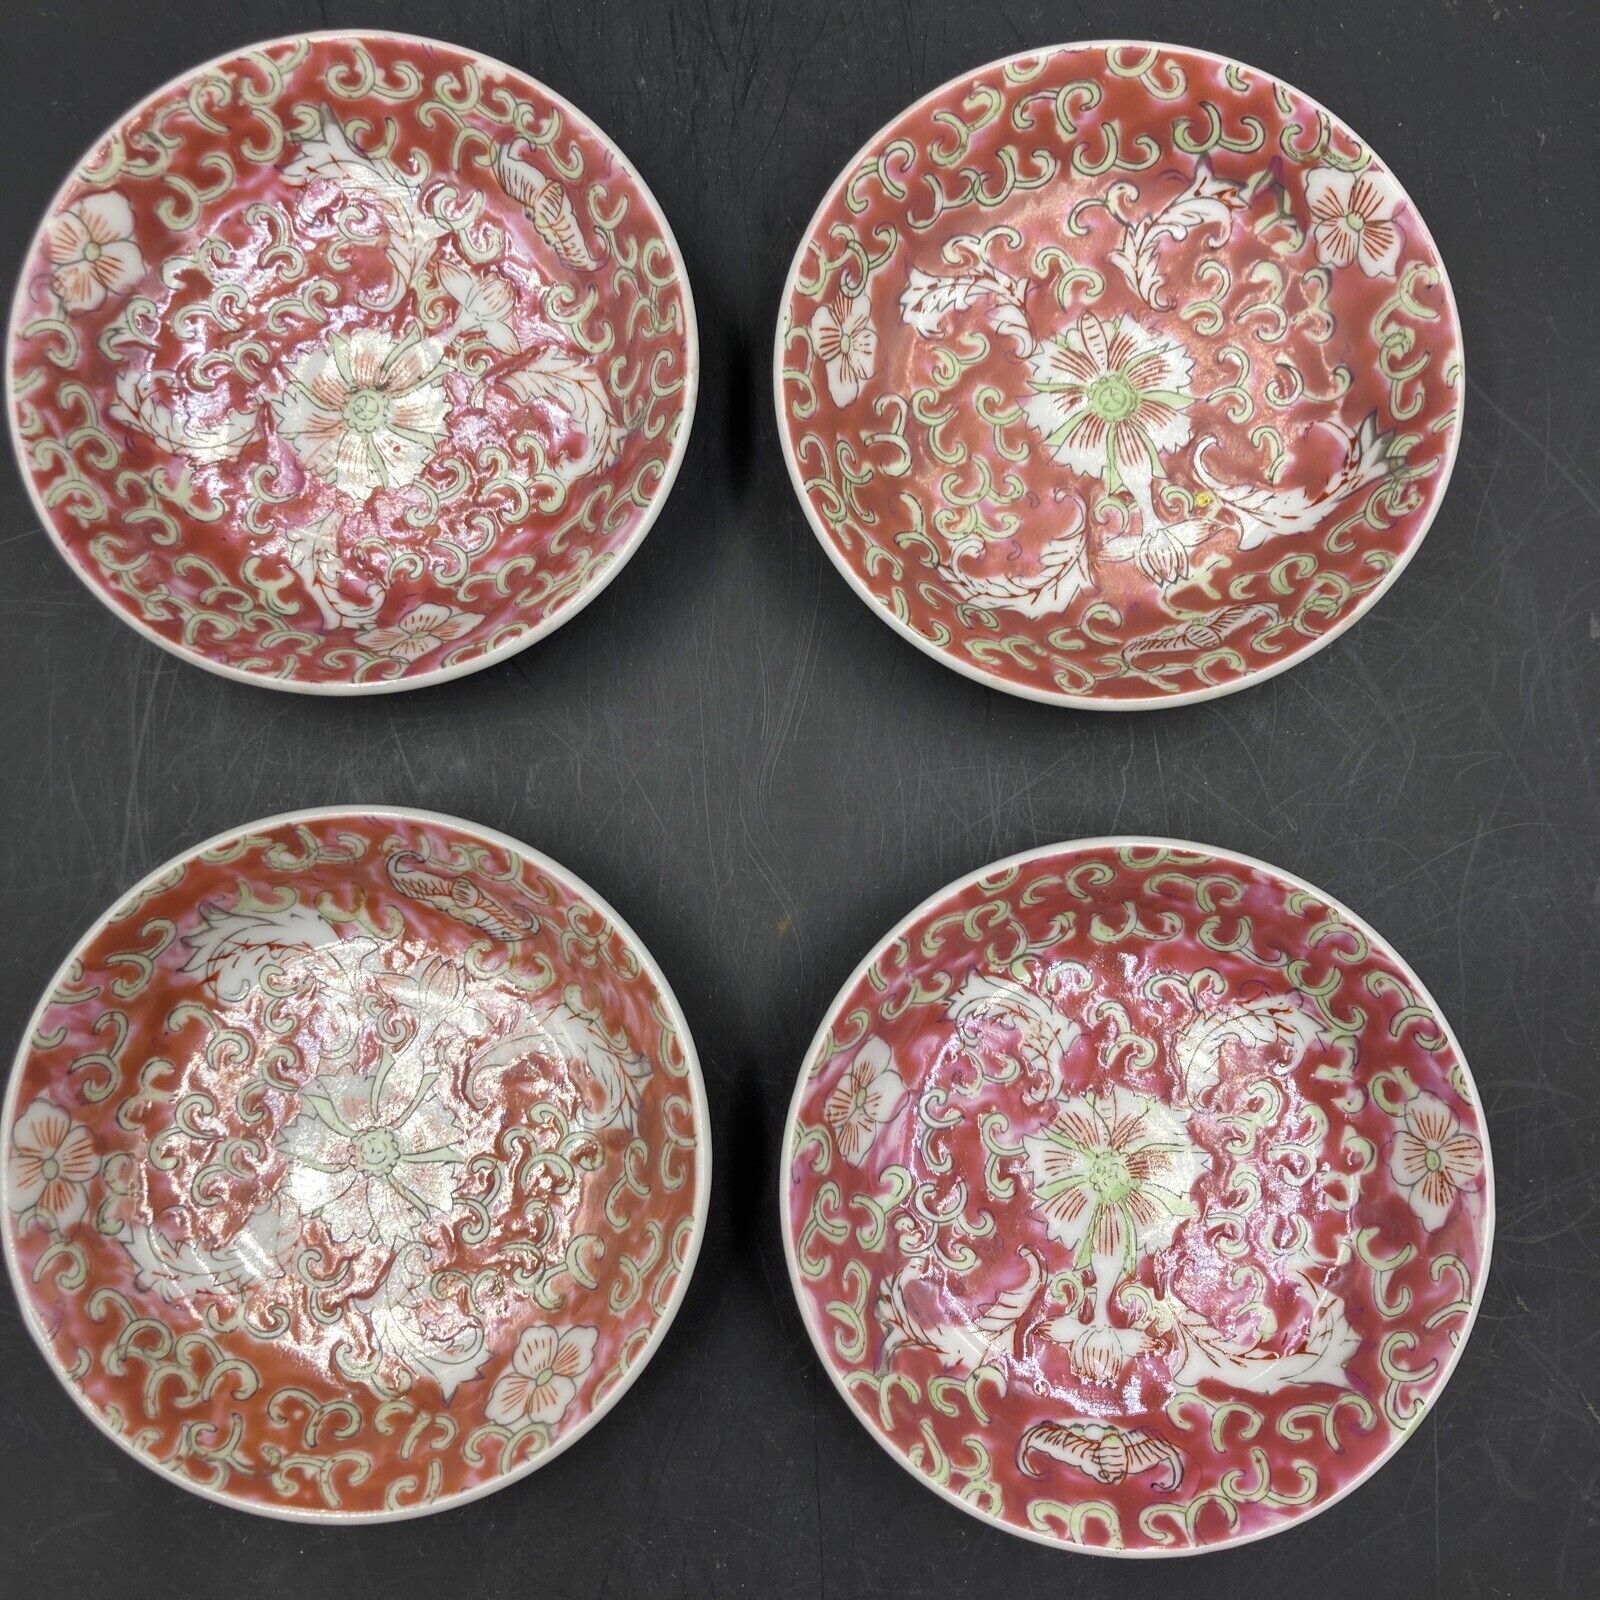  P.C.T. 4 pc Hand Decorated in Hong Kong Japanese Porcelain Ware Small Bowl 4”  